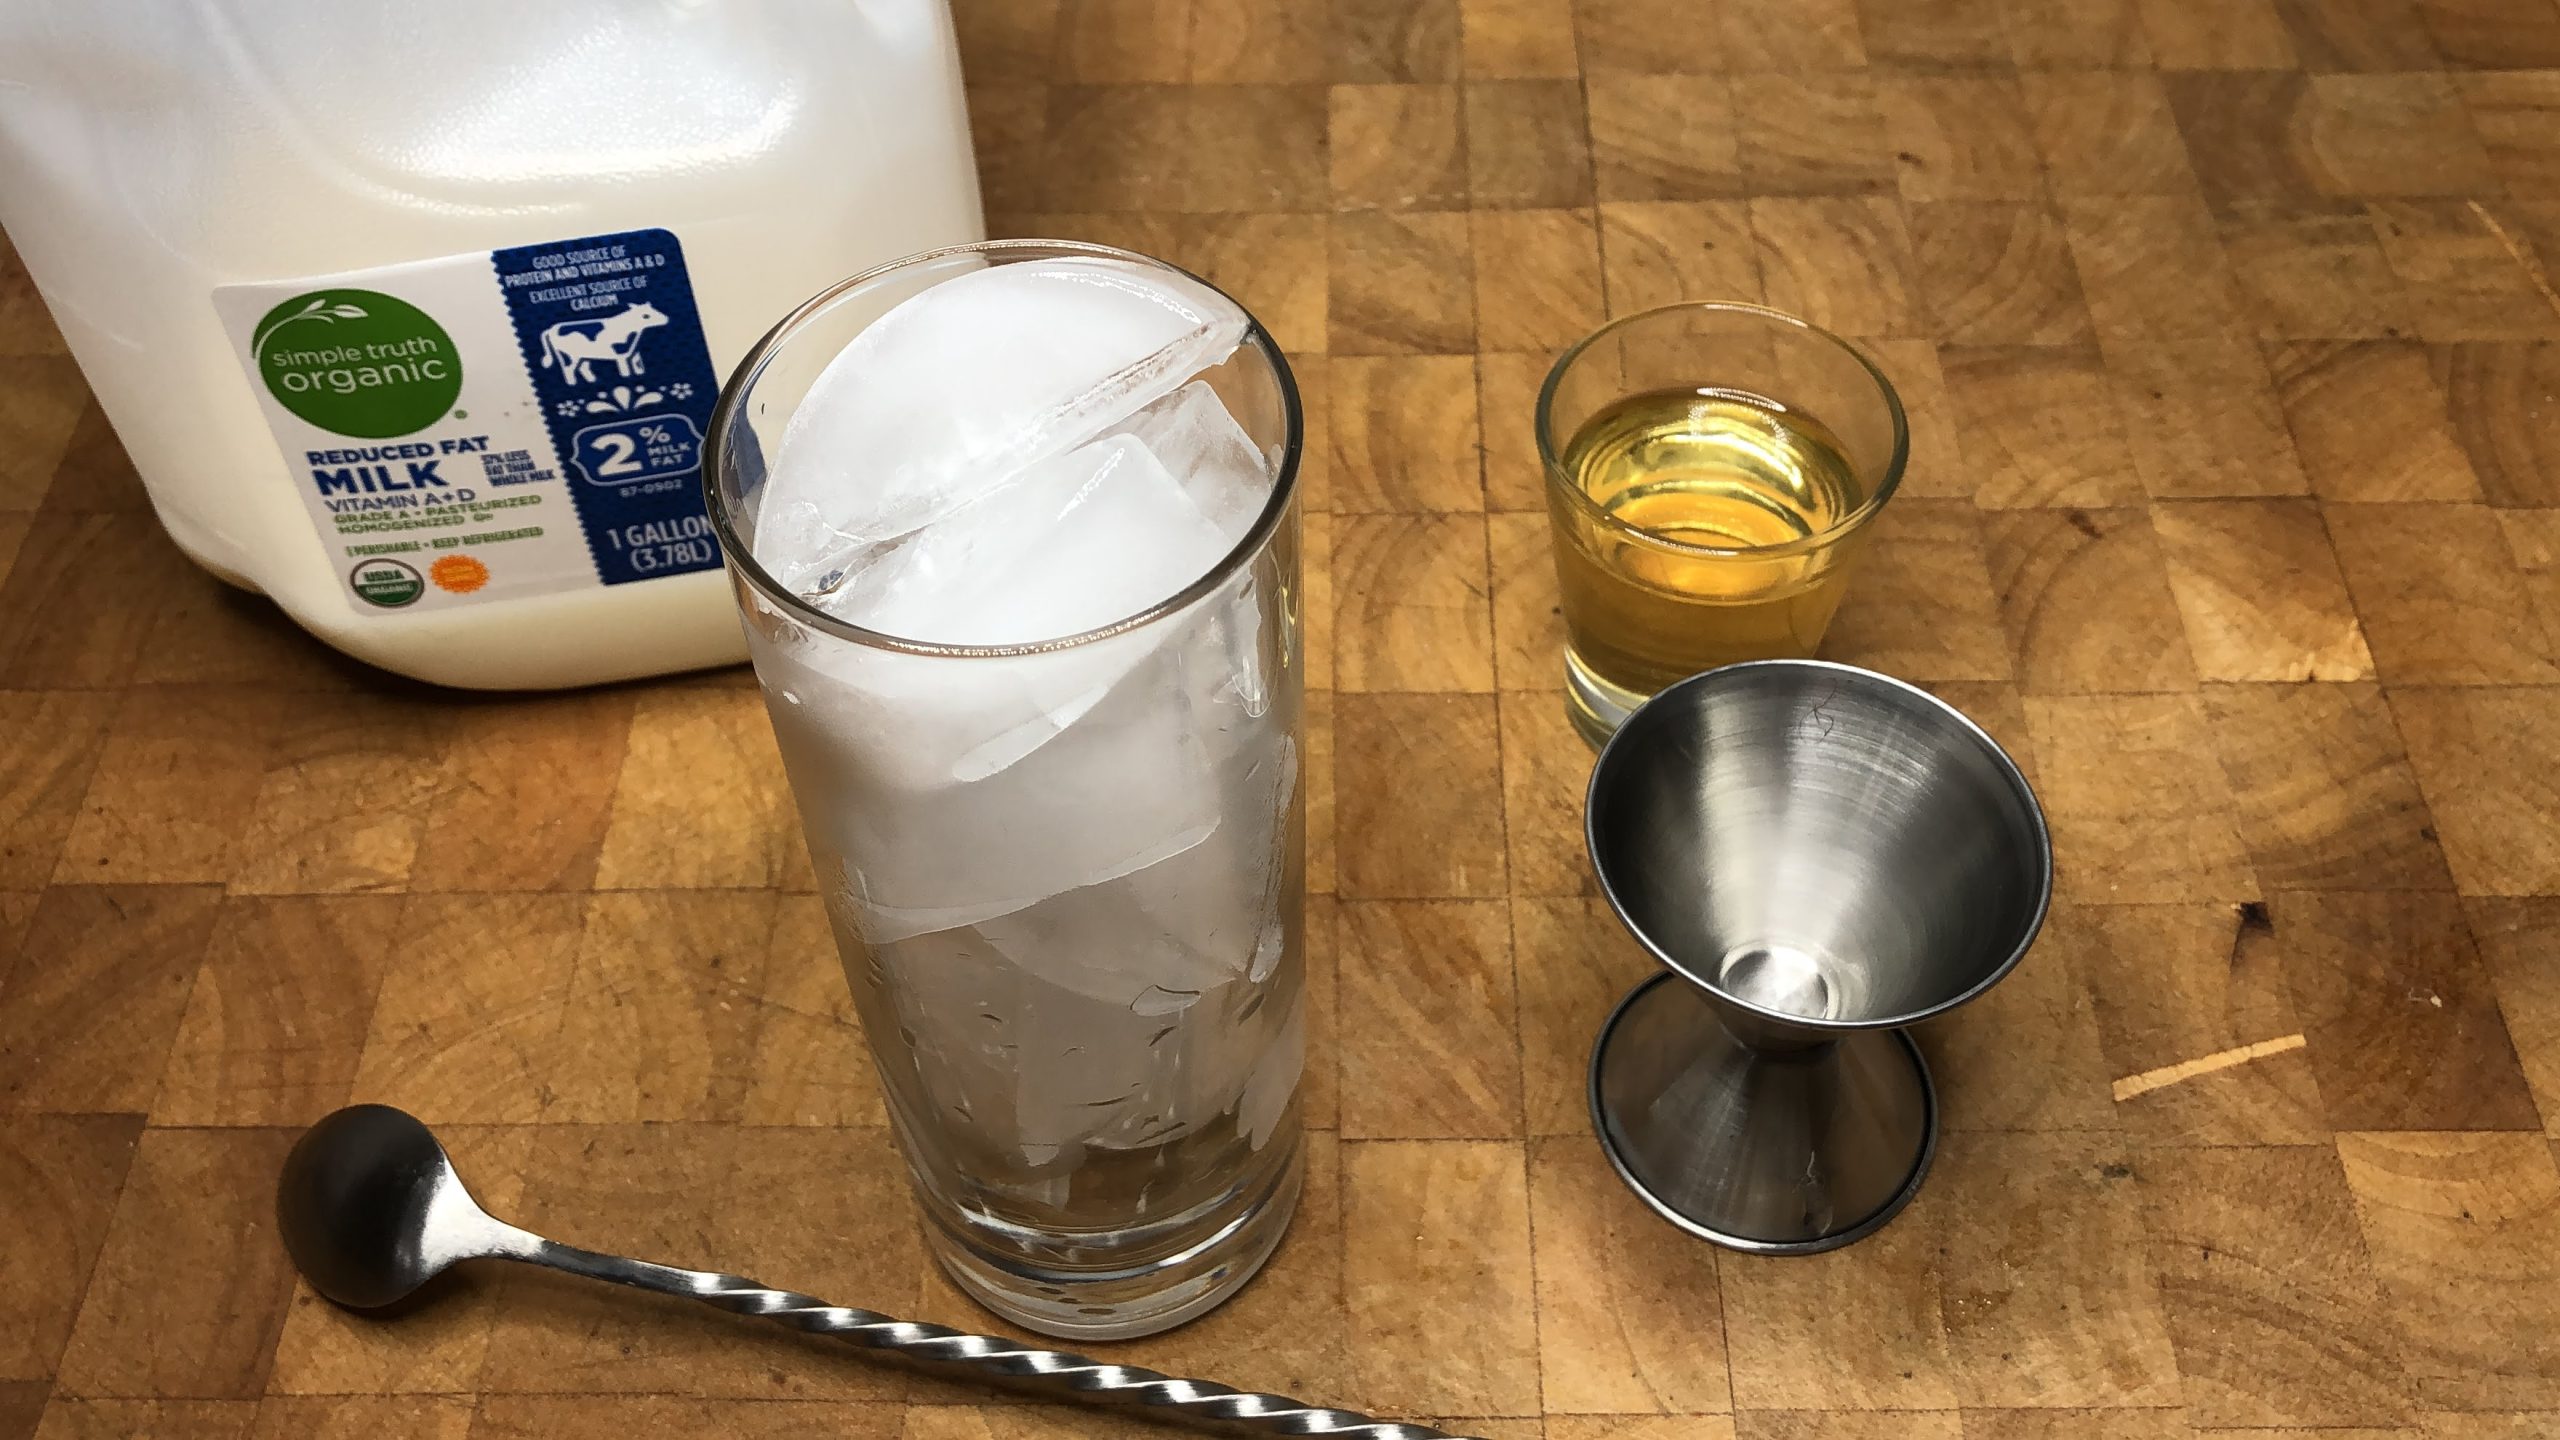 Milk and sugar cookie syrup next to highball glass with ice, jigger and bar spoon.